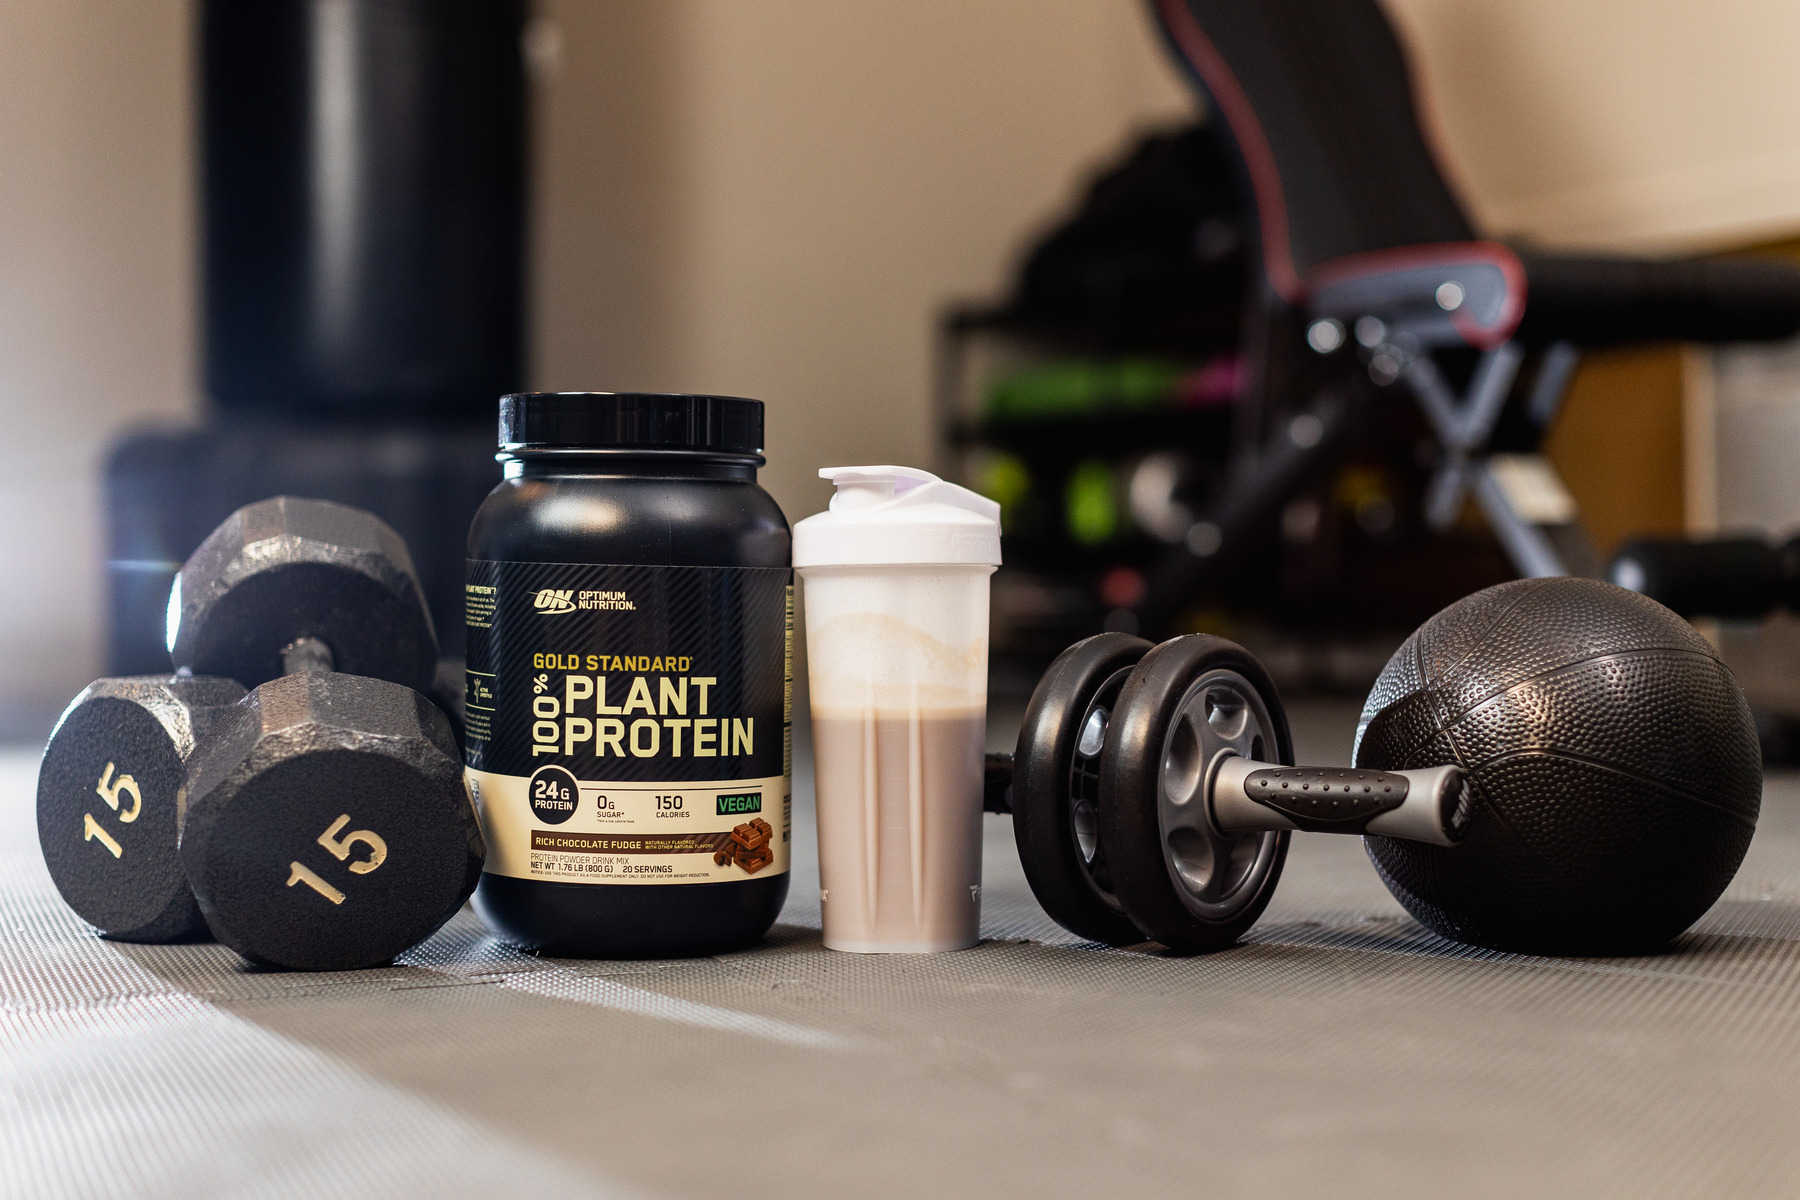 Gold Standard Plant Protein Powder container next to a protein shake, weights, and ab roller on a gym floor